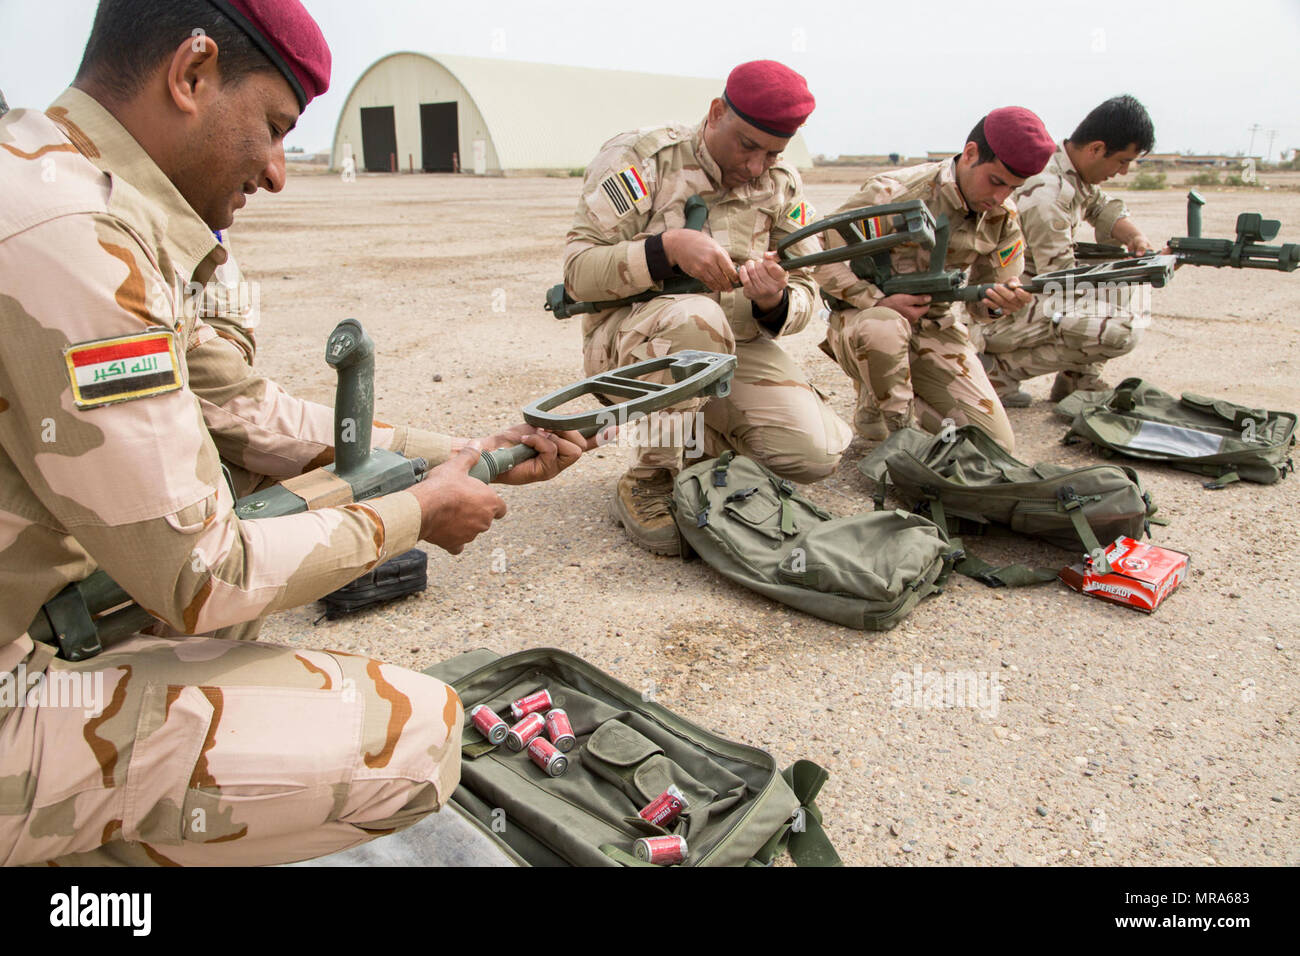 Iraqi security forces soldiers assemble mine detectors during counter improvised explosive device training provided by British army trainers deployed in support of Combined Joint Task Force – Operation Inherent Resolve at Camp Taji, Iraq, April 12, 2017. This training is part of the overall Combined Joint Task Force – Operation Inherent Resolve building partner capacity mission by training and improving the capability of partnered forces fighting ISIS. CJTF-OIR is the global Coalition to defeat ISIS in Iraq and Syria. Stock Photo